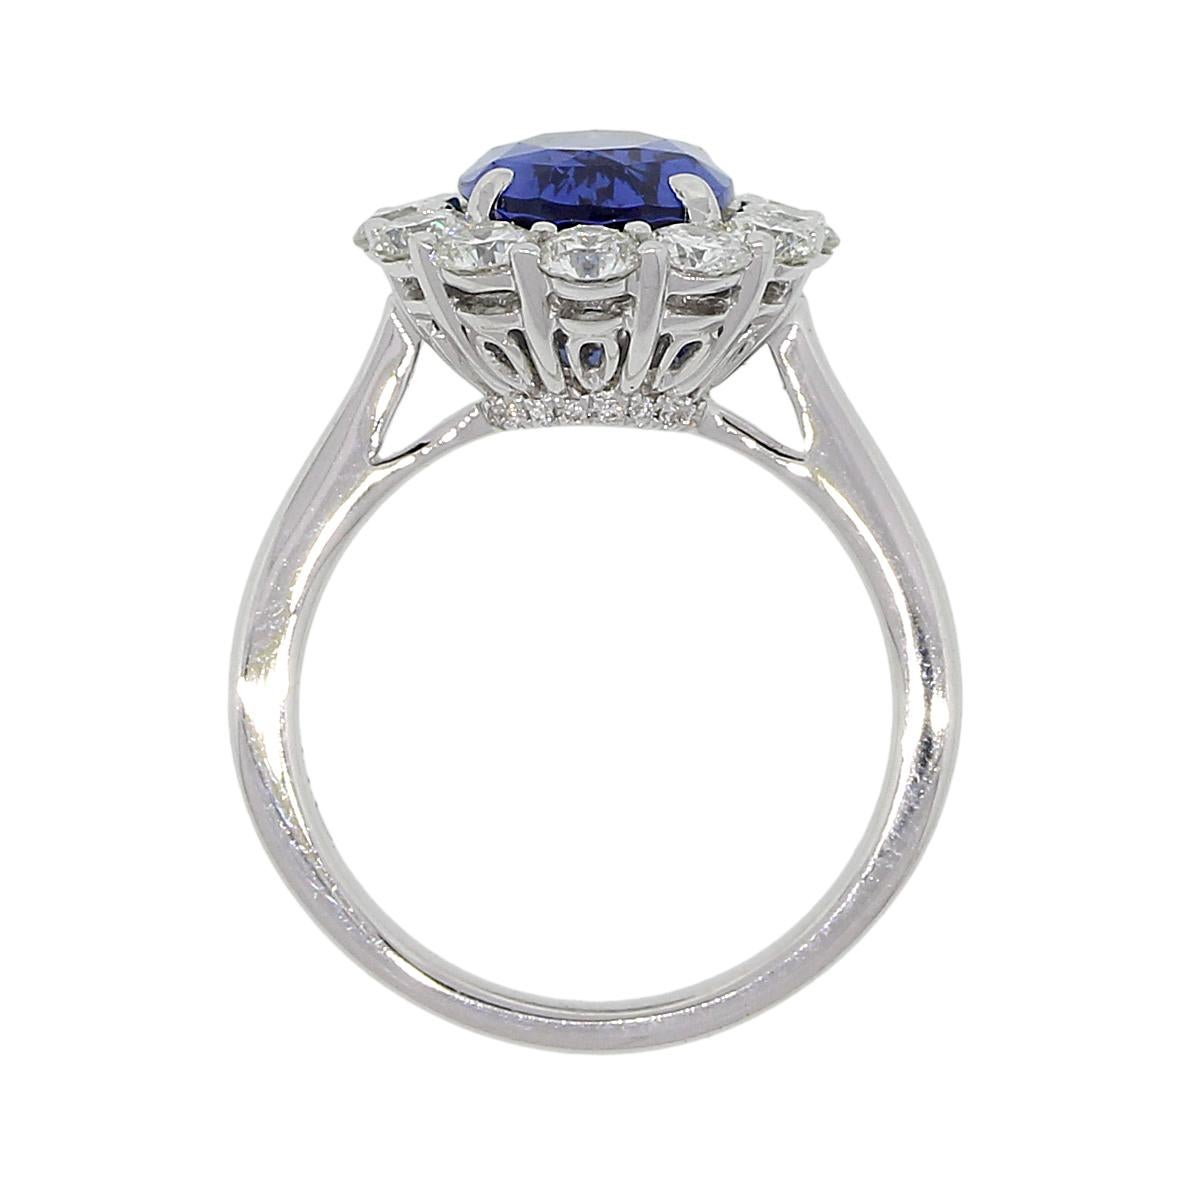 Material: 18k white gold
Gemstone Details: GIA certified 3.48ct oval shape sapphire. GIA# 2181395102
Diamond Details: Approximately 1.37ctw of round brilliant diamonds. Diamonds are G/H in color and VS in clarity
Size: 6.5
Total Weight: 5.9g